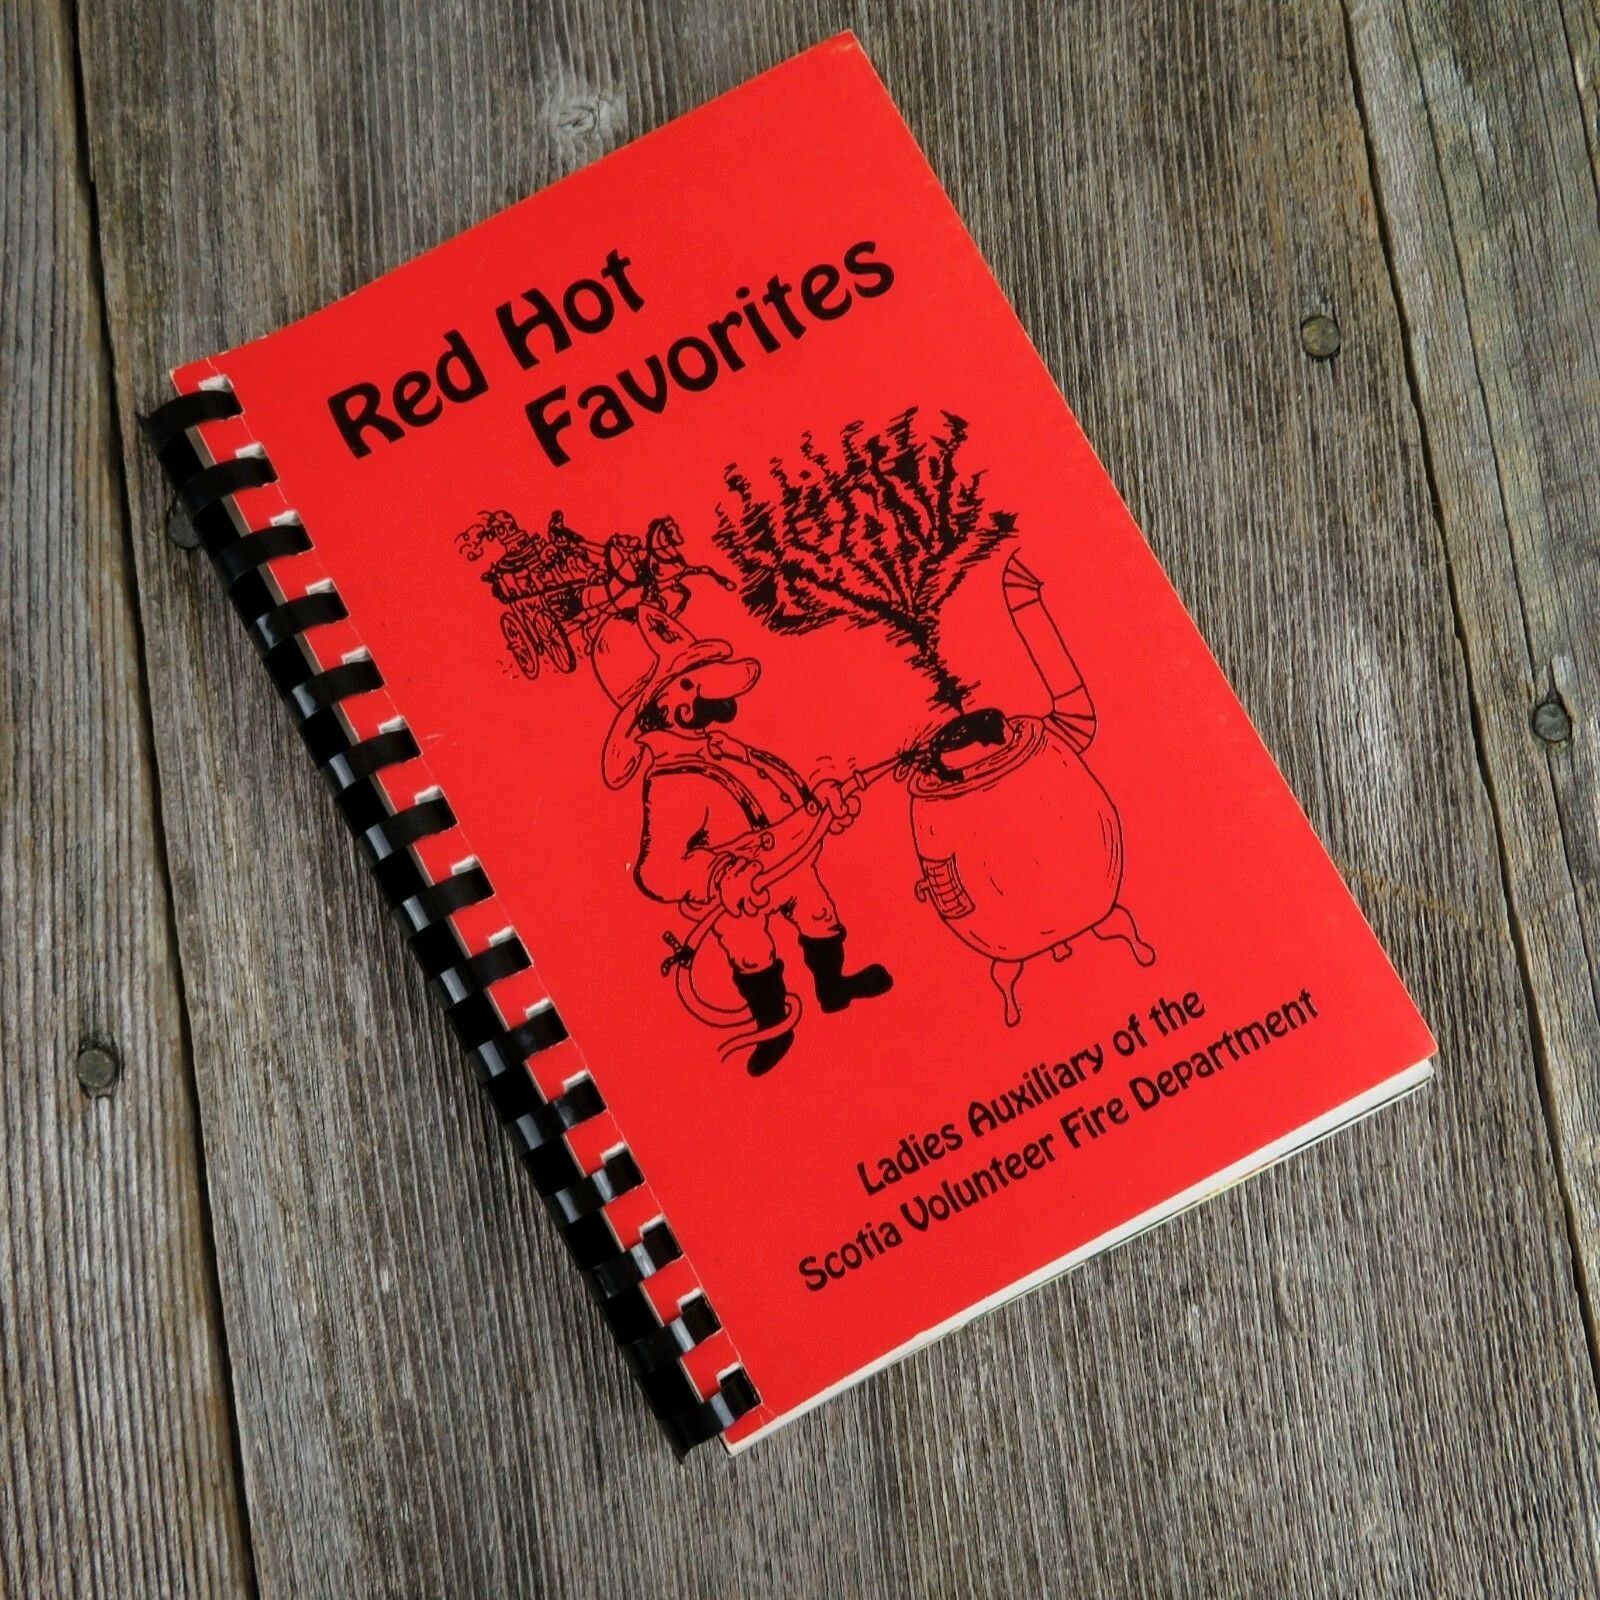 Vintage California Cookbook Scotia Fire Department Ladies Auxiliary 1995 Red Hot - At Grandma's Table